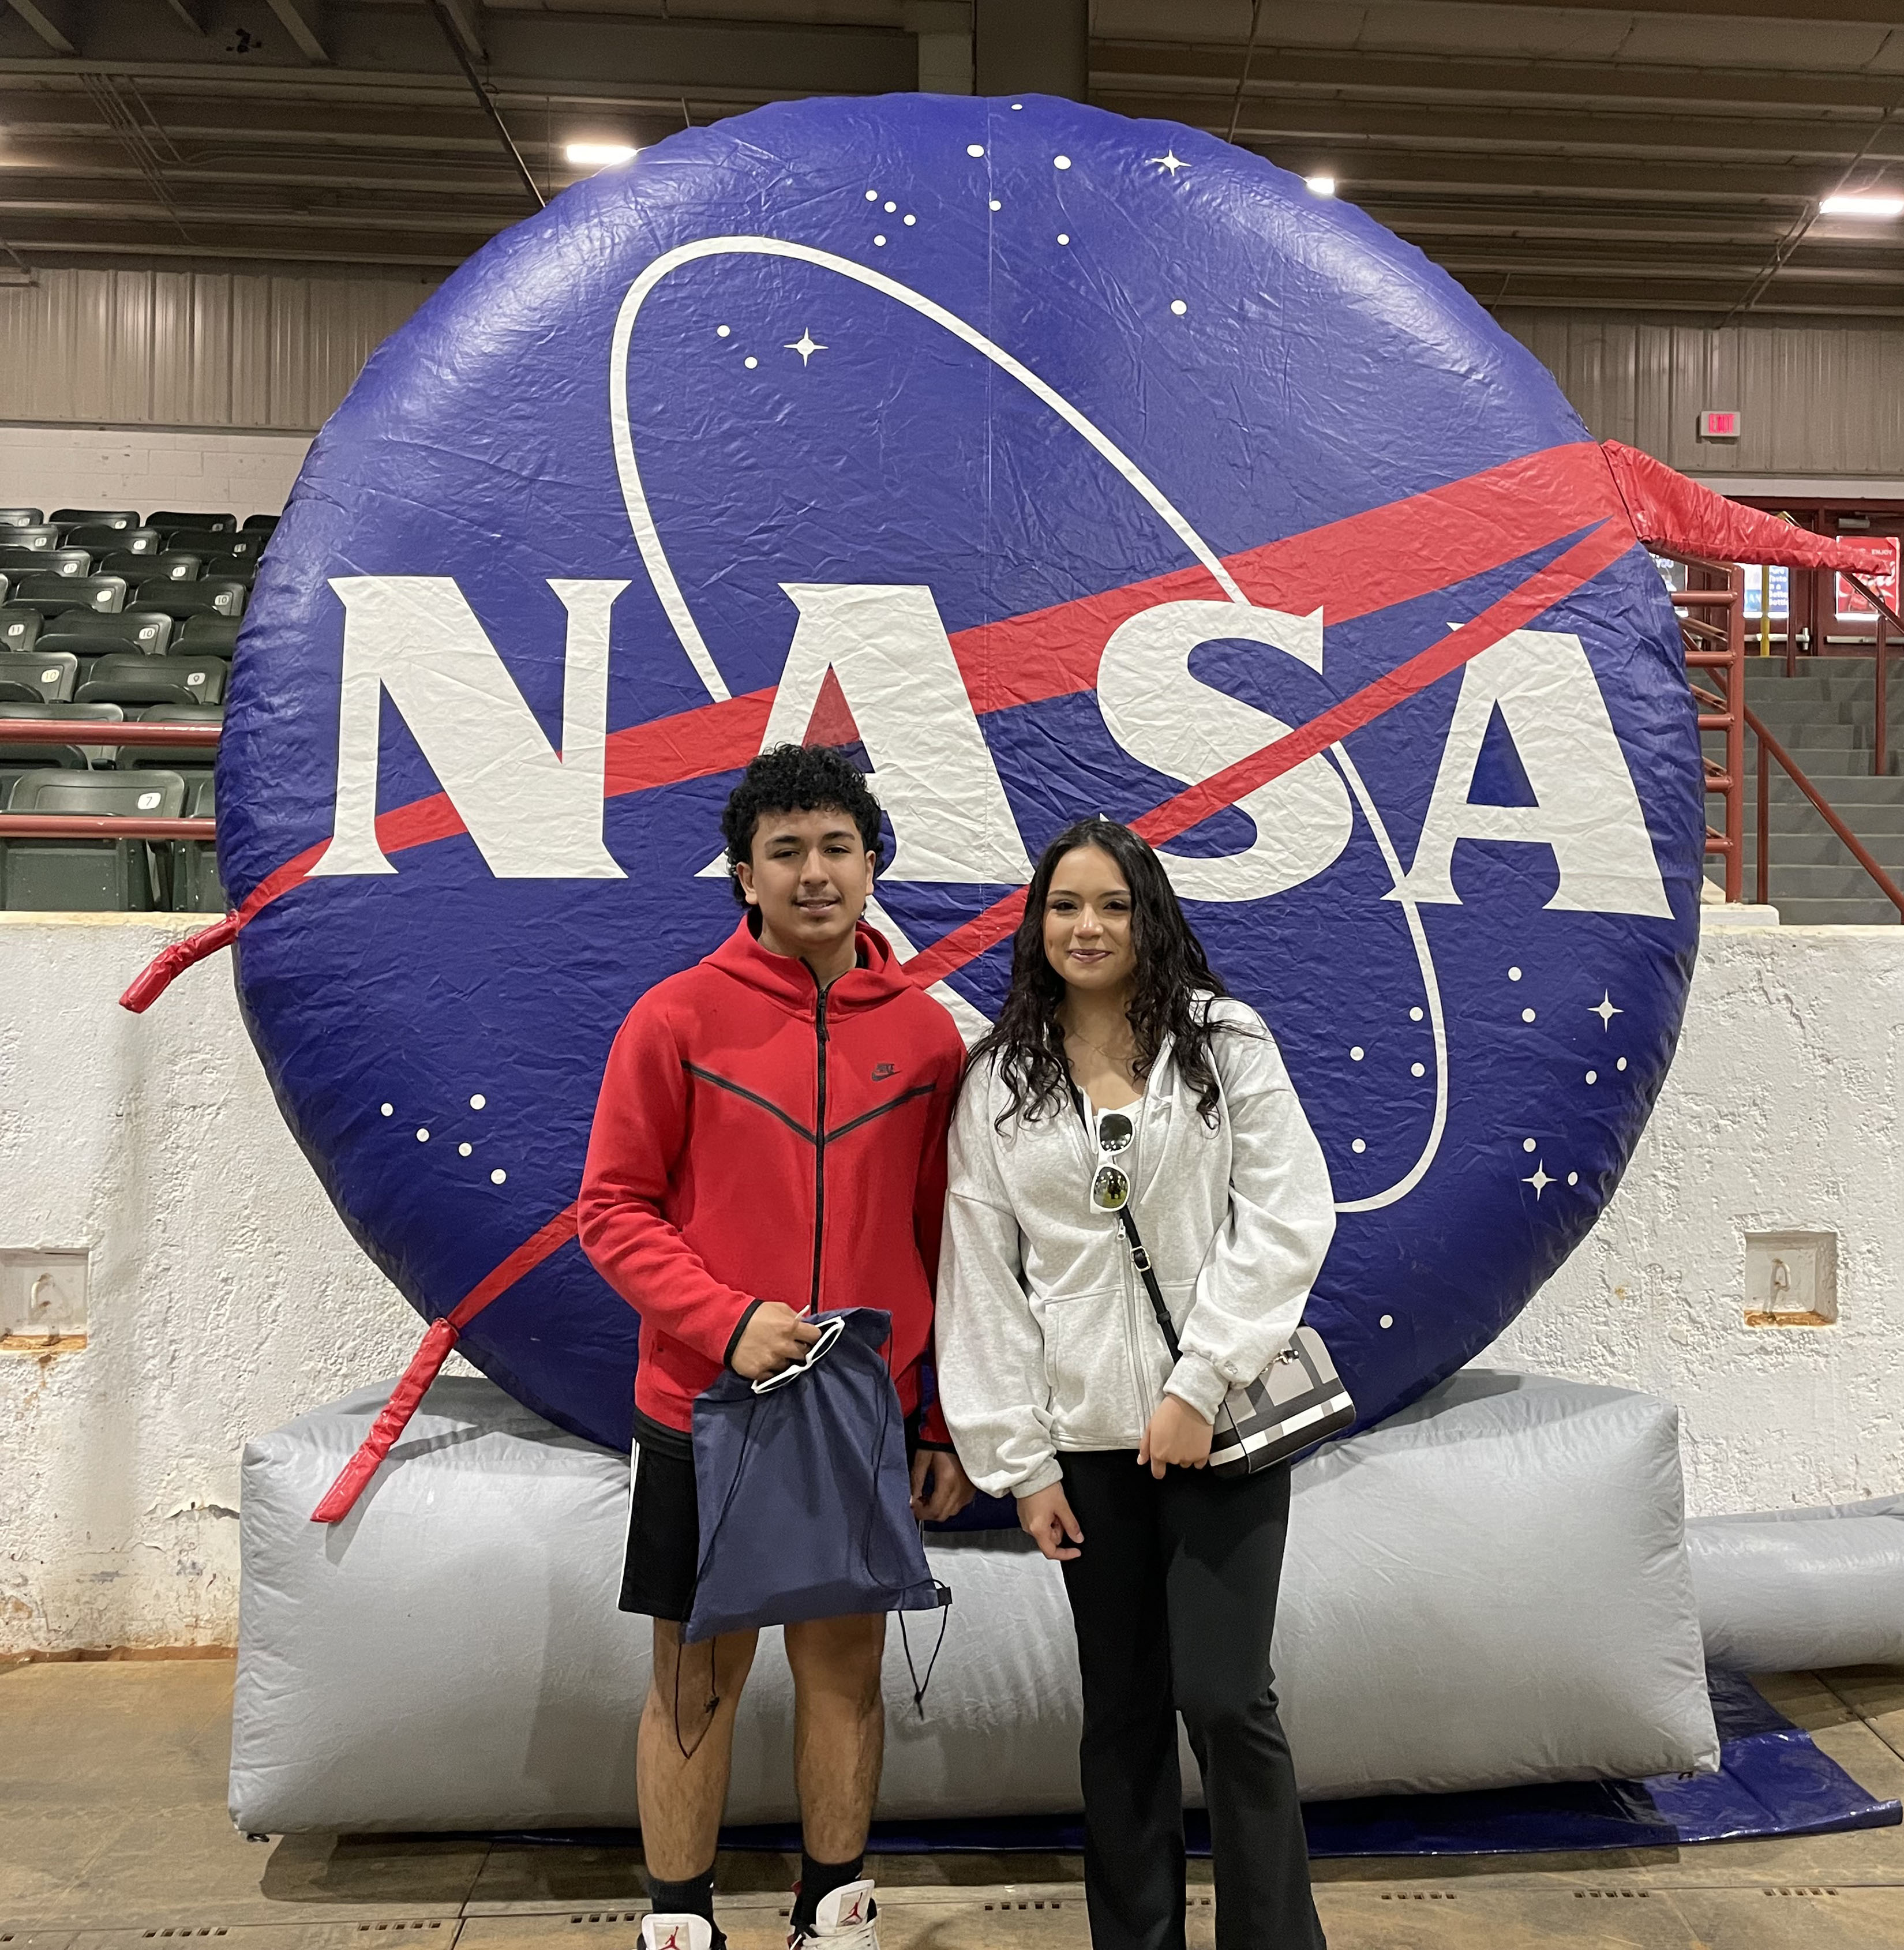 Two event-goers pose for an image in front the NASA meatball inflatable